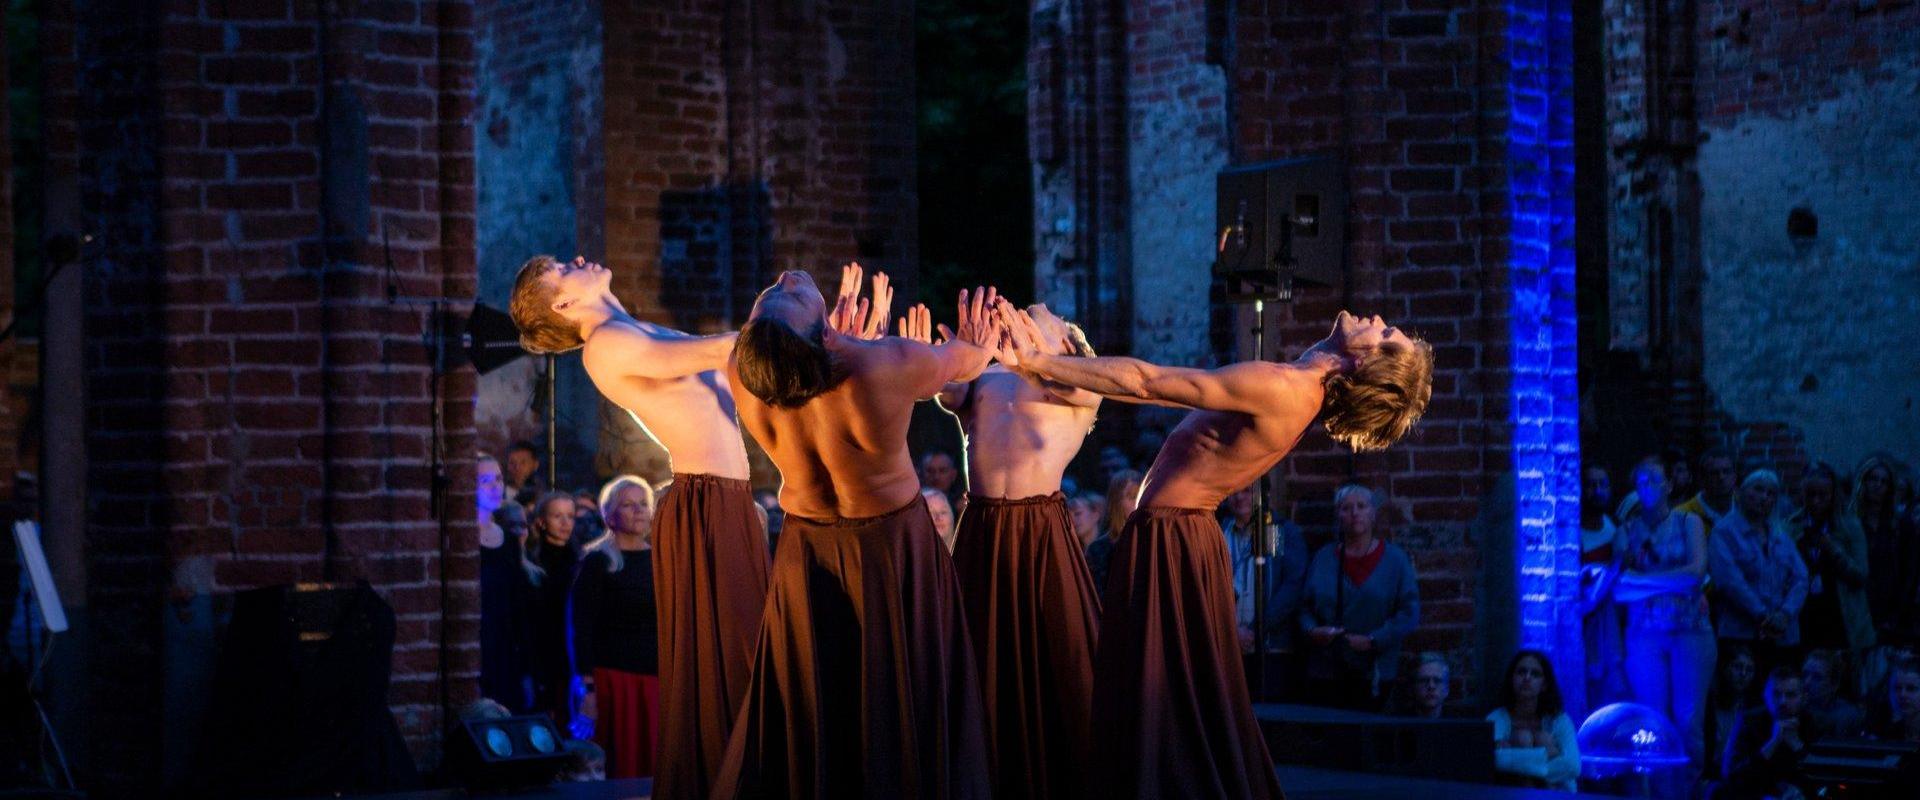 Tartu Cathedral, a dance performance in the ruins